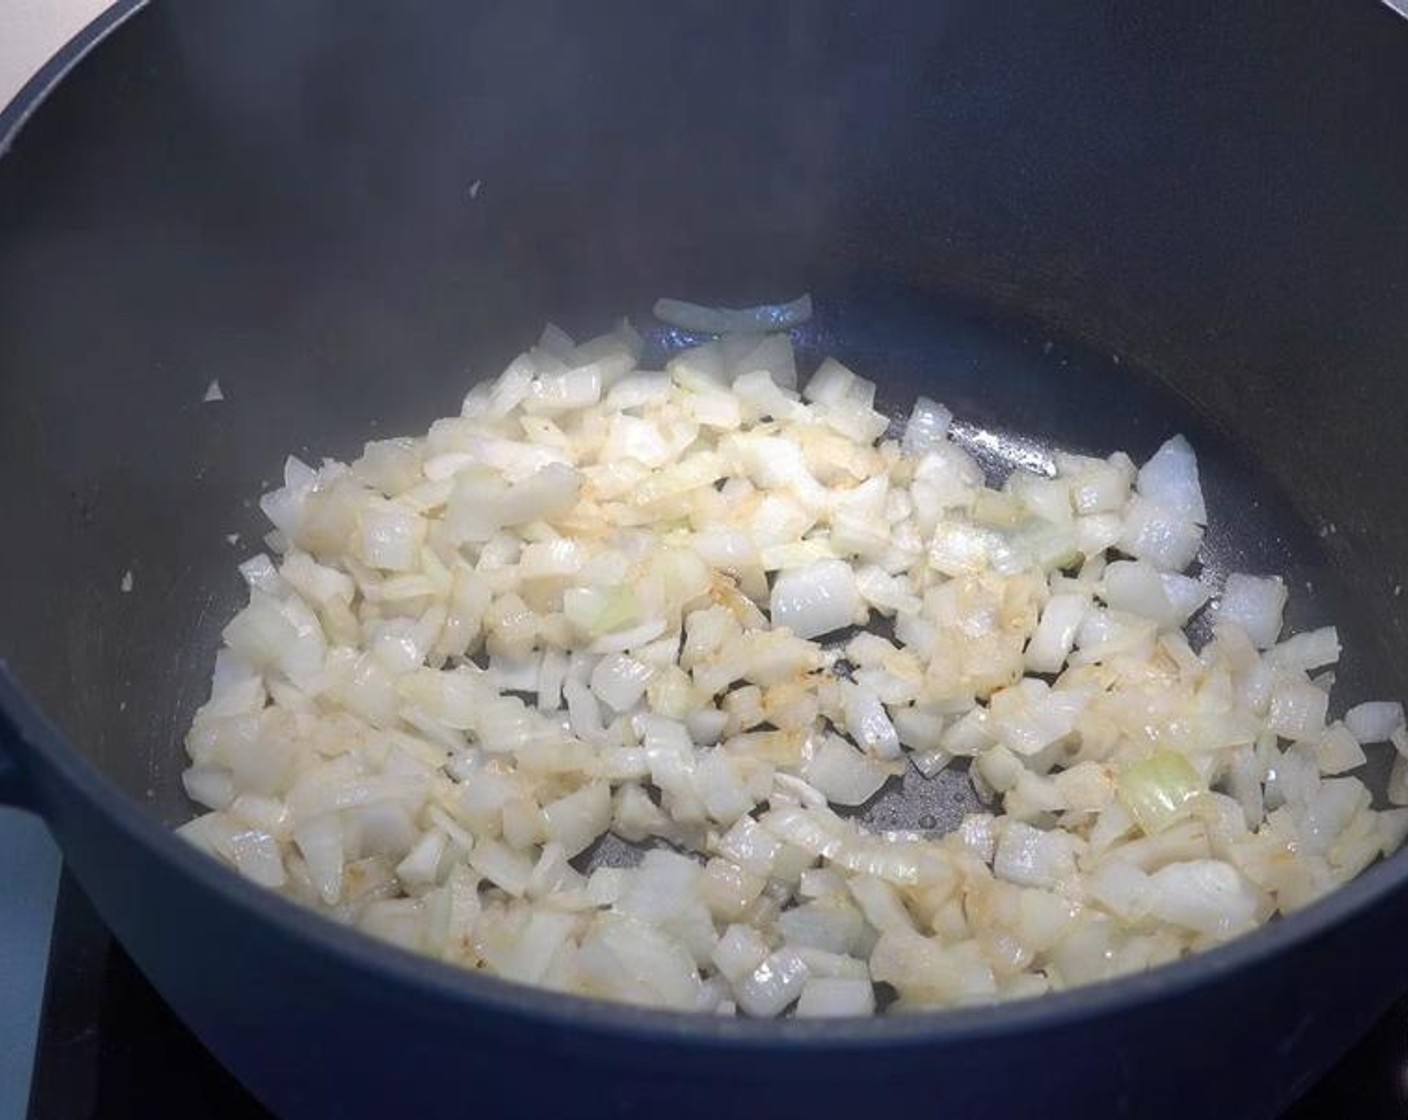 step 2 Into the same pot, add Onion (1), Garlic (1 tsp) and juice from Lemon (1). Cook, stirring occasionally, for 2-3 minutes, until the onions start to soften.